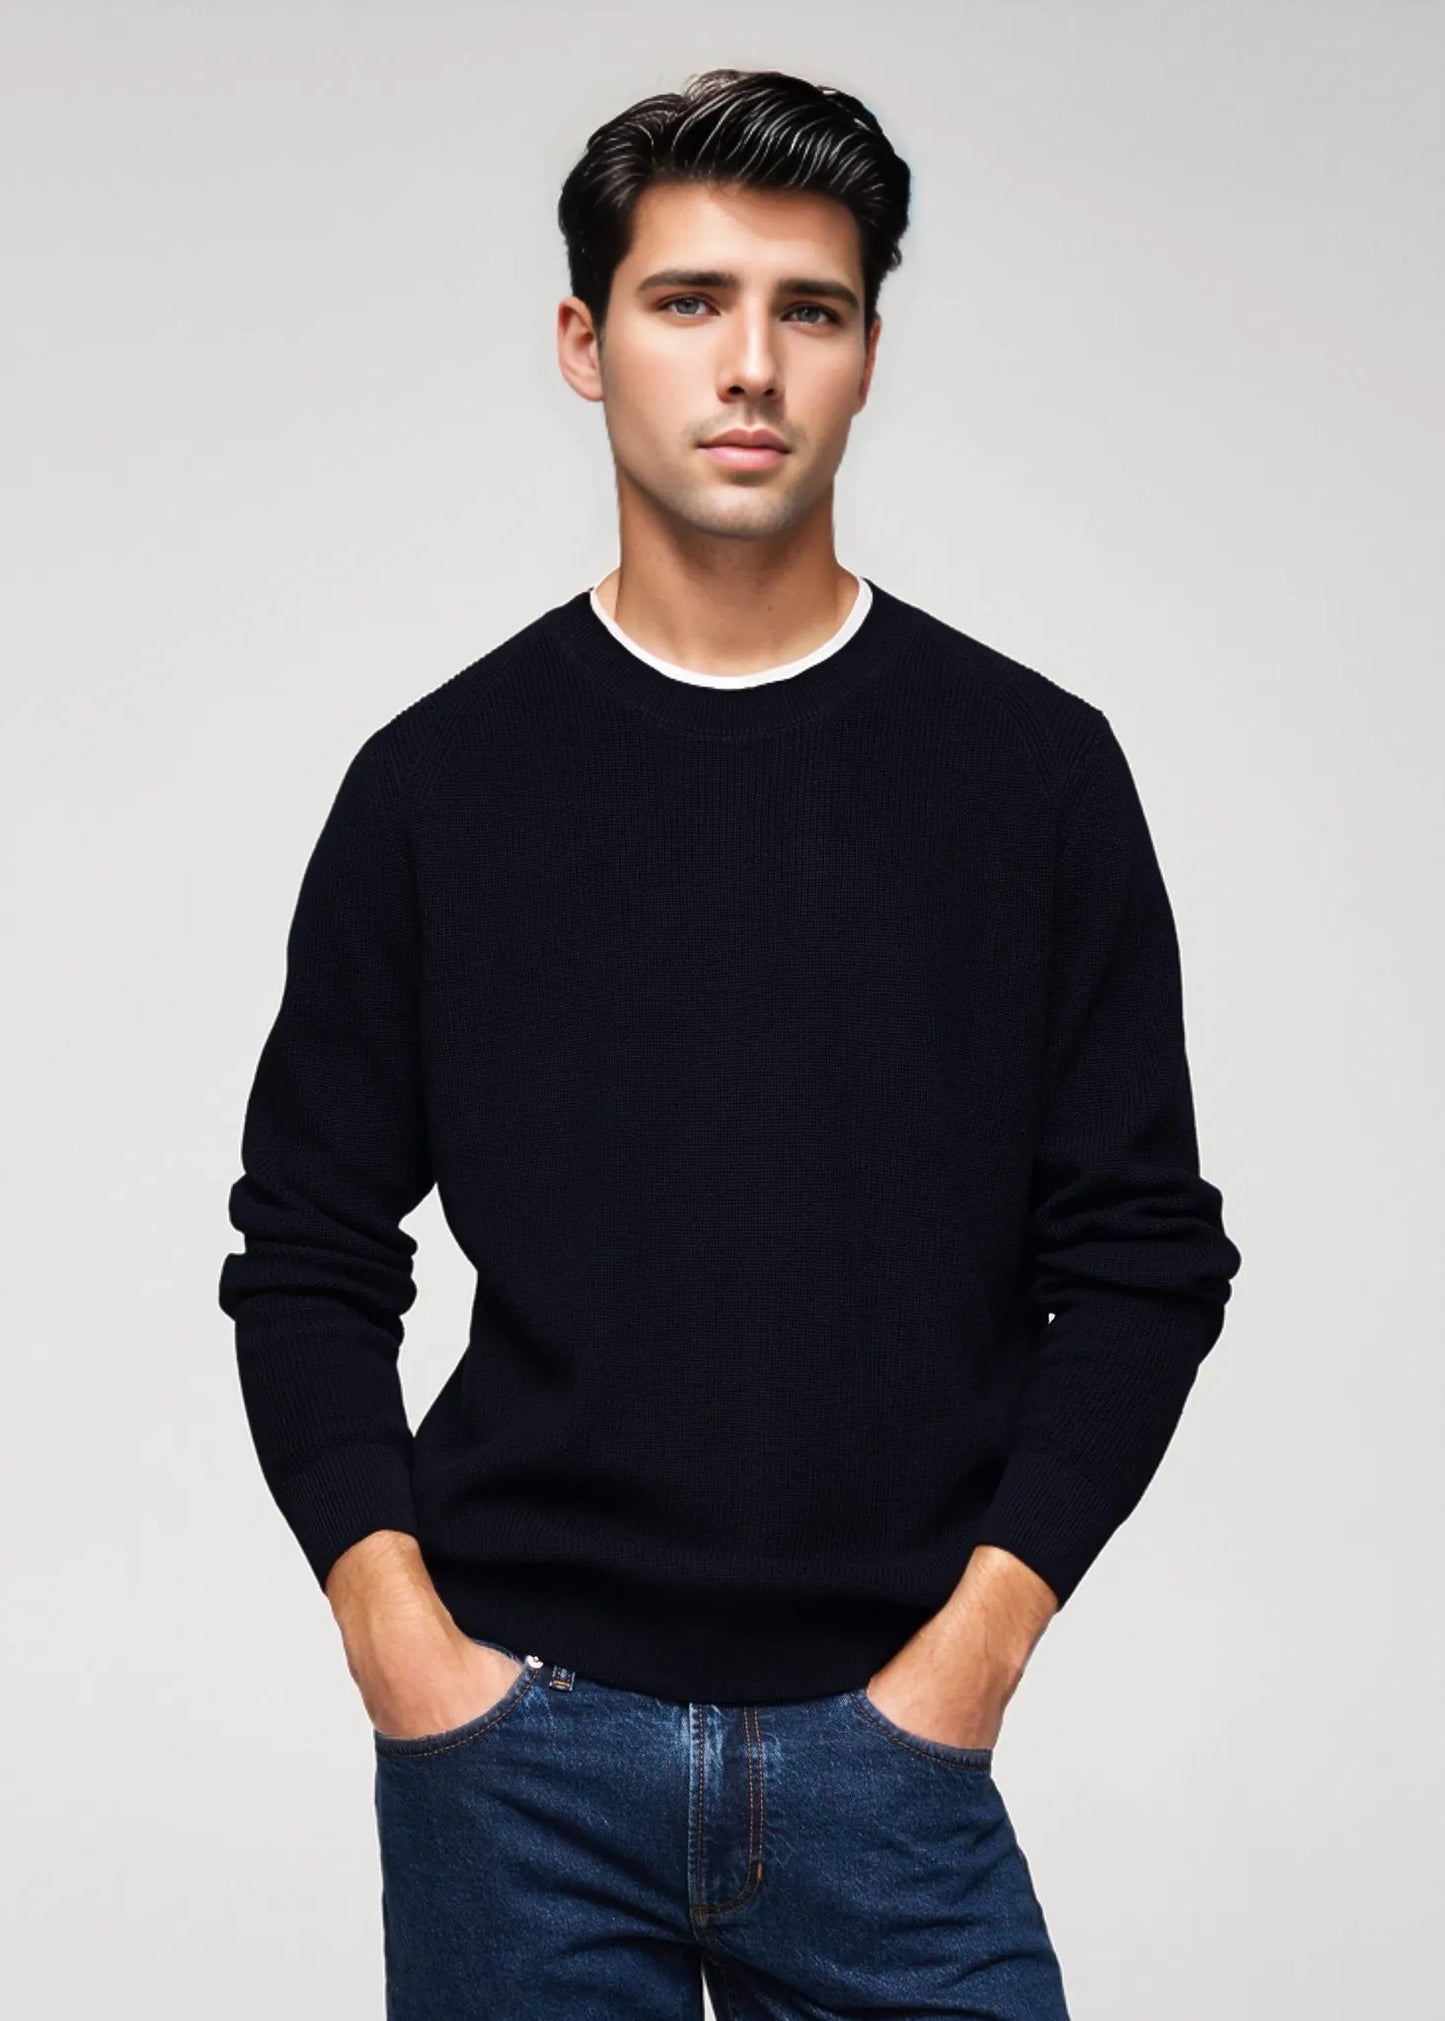 Hemsters Blue Knitted Sweatshirt For Mens